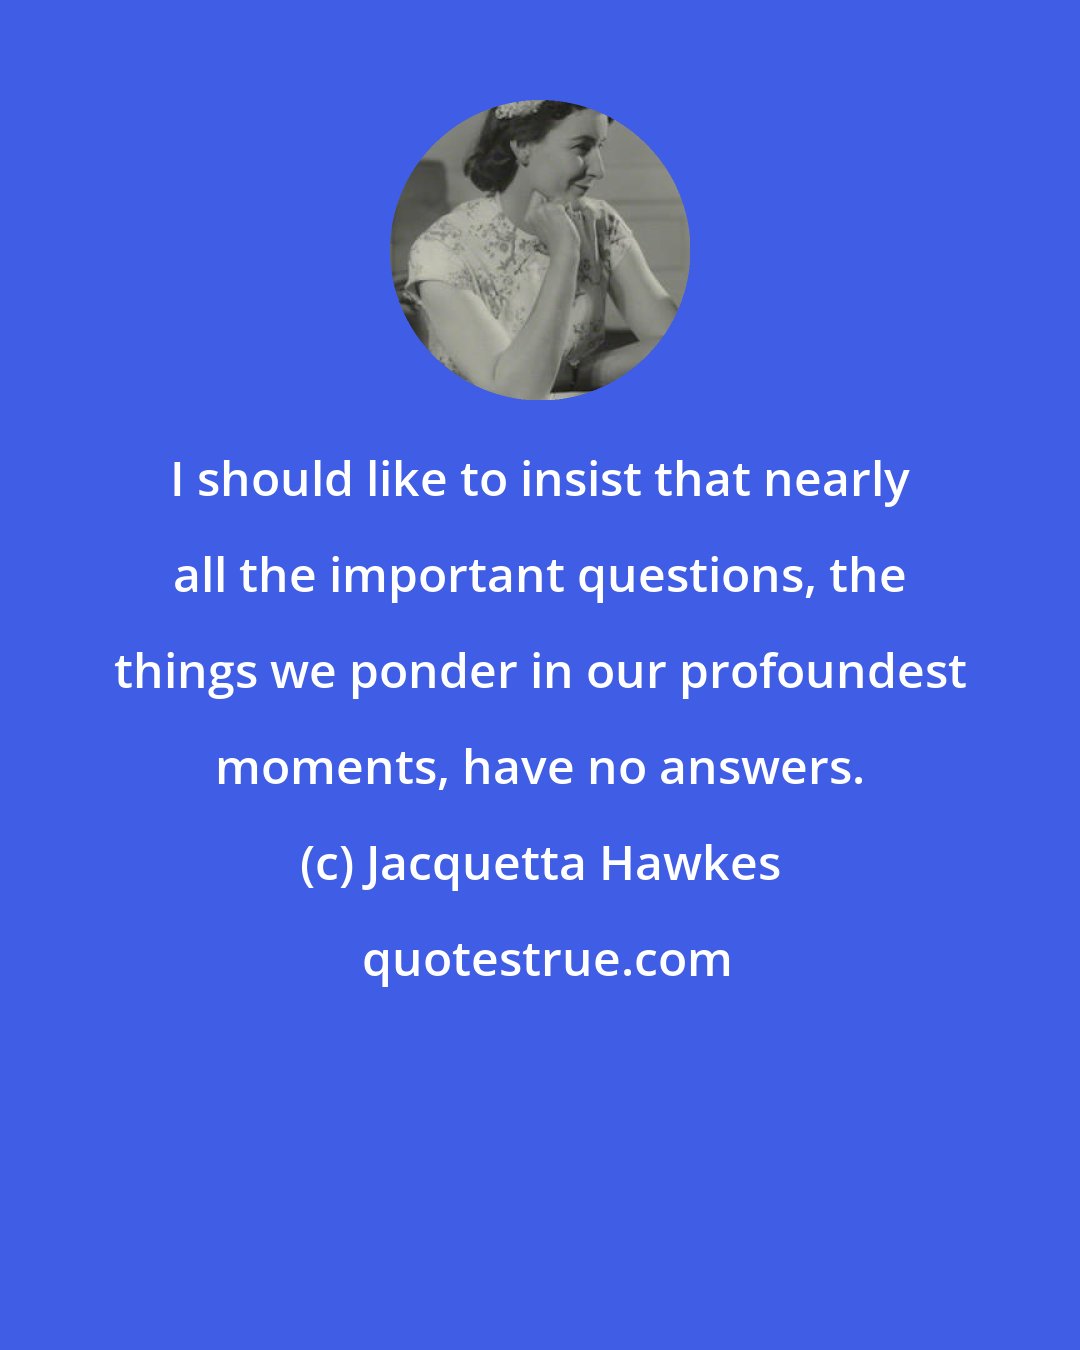 Jacquetta Hawkes: I should like to insist that nearly all the important questions, the things we ponder in our profoundest moments, have no answers.